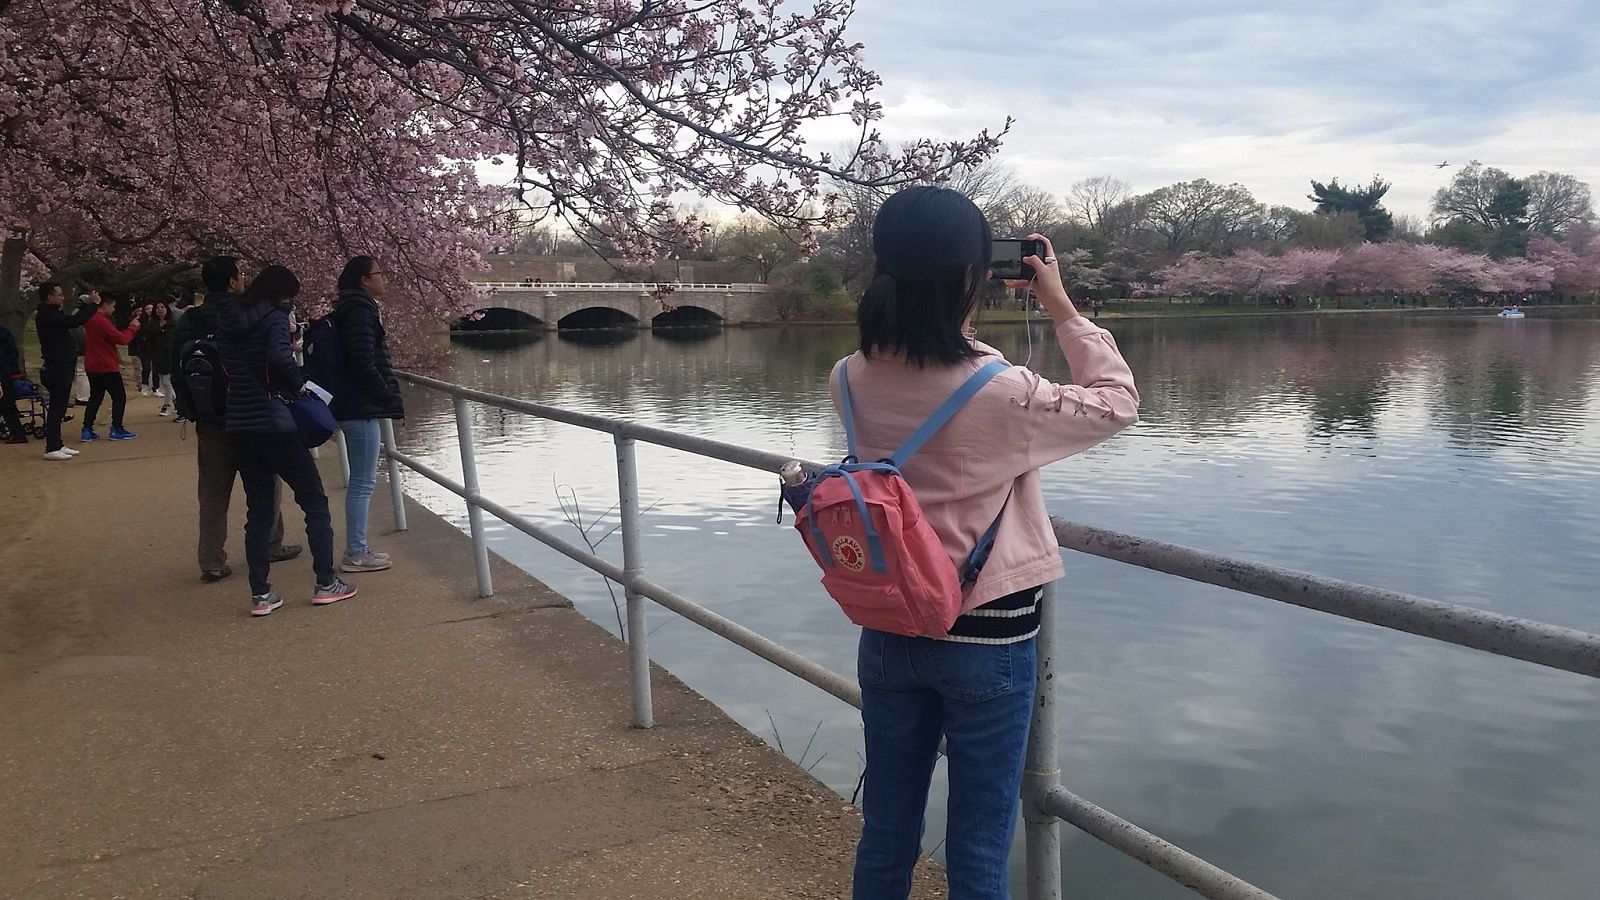 The cherry blossoms reached the "puffy white" stage, which is the final stage before peak bloom, on Sunday April 1, 2018. (WTOP/Kathy Stewart)